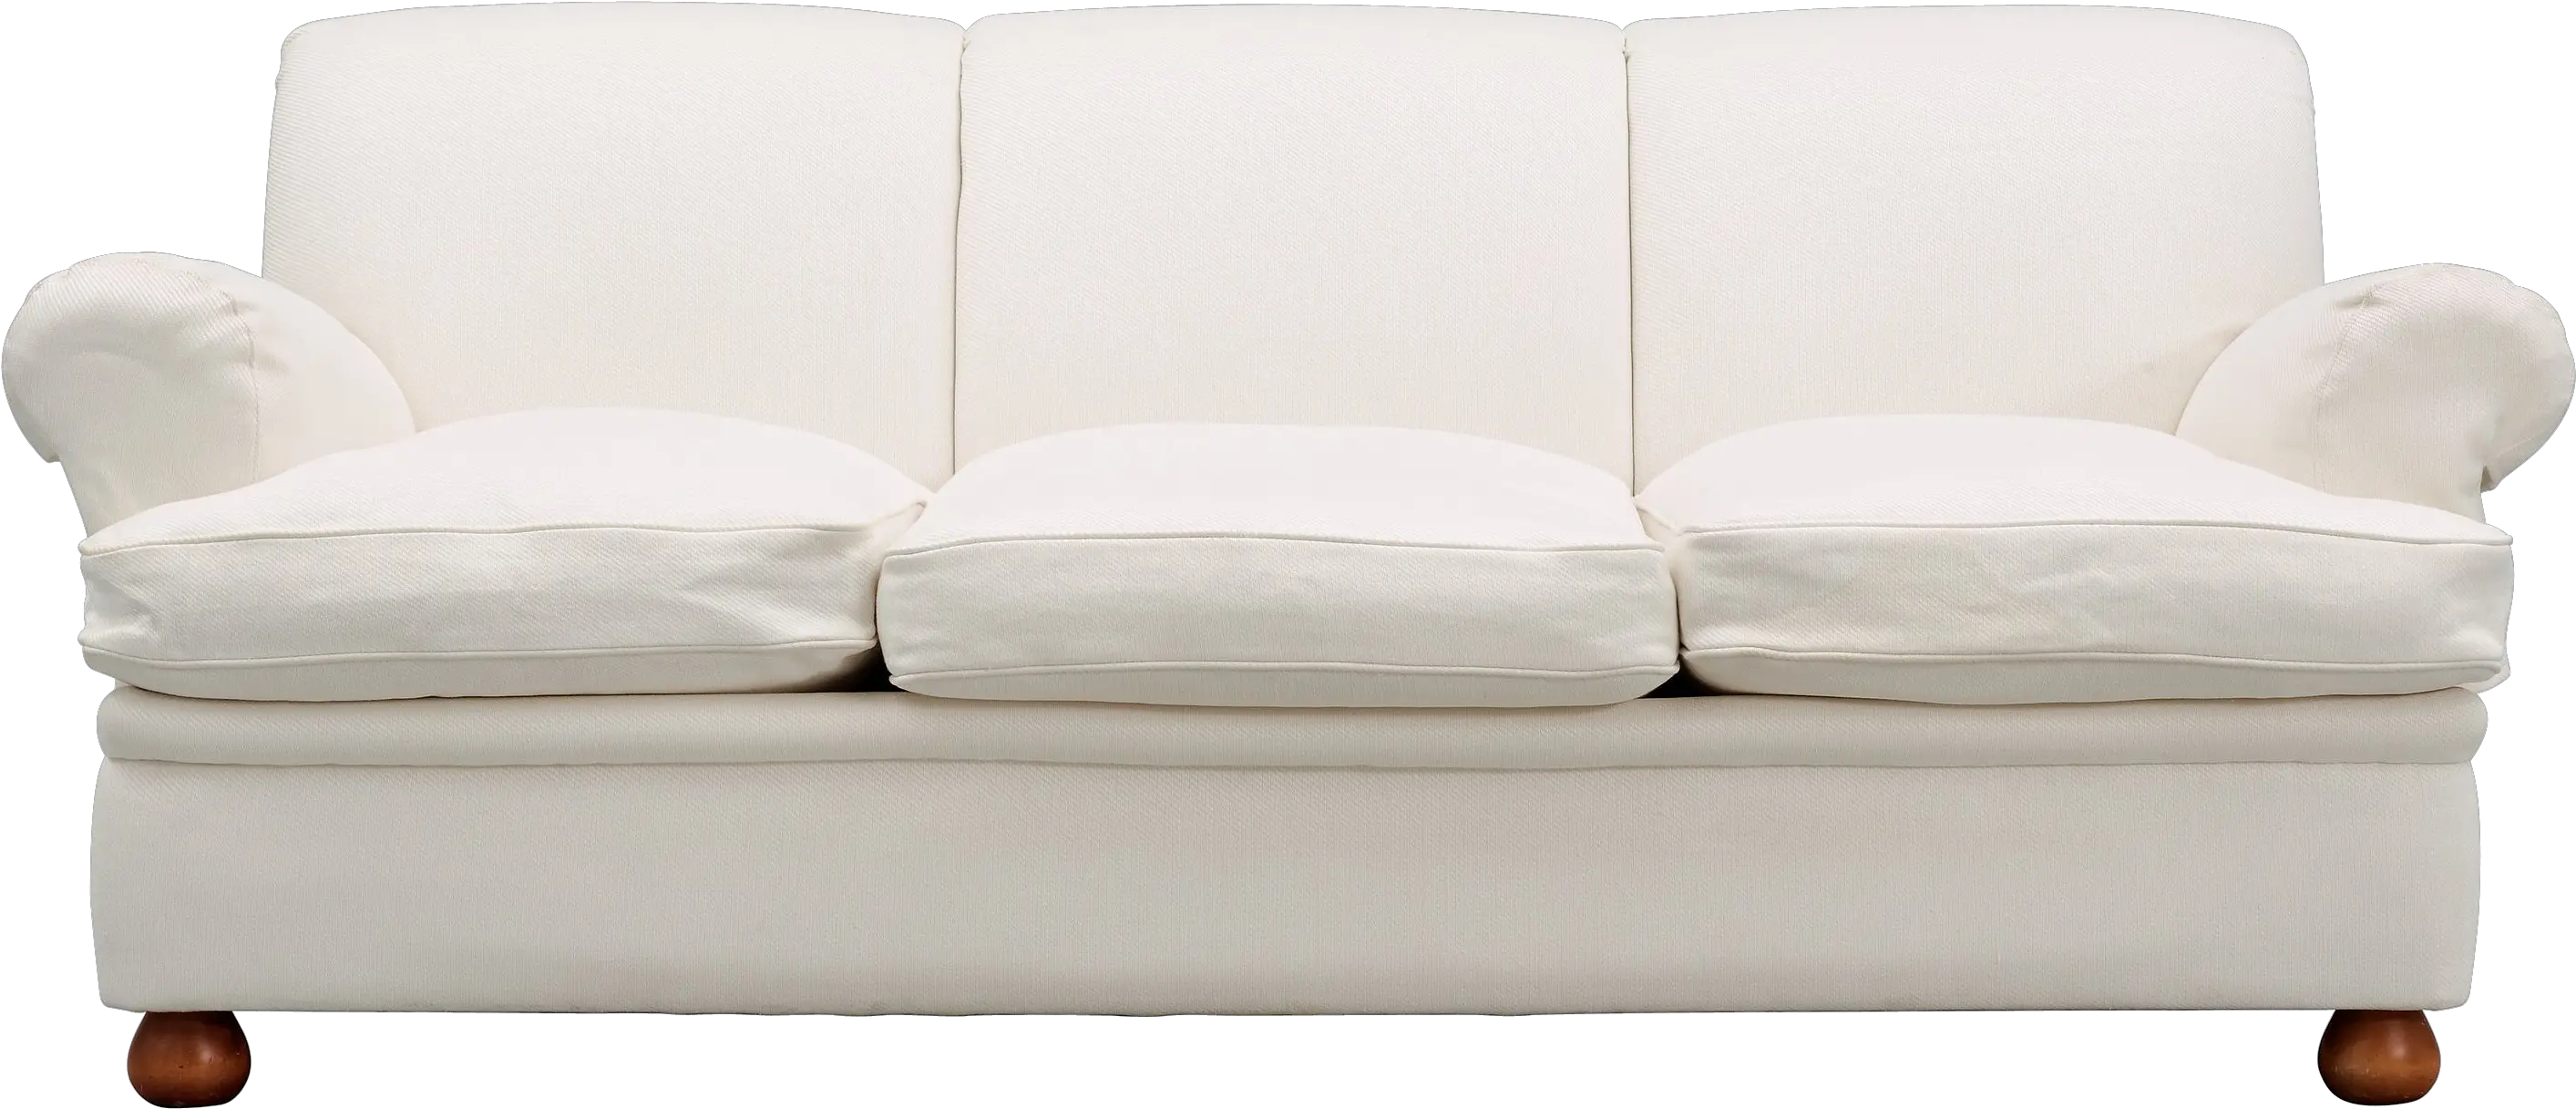 Download Sofa Png Image For Free White Sofas Furniture Bed Transparent Background